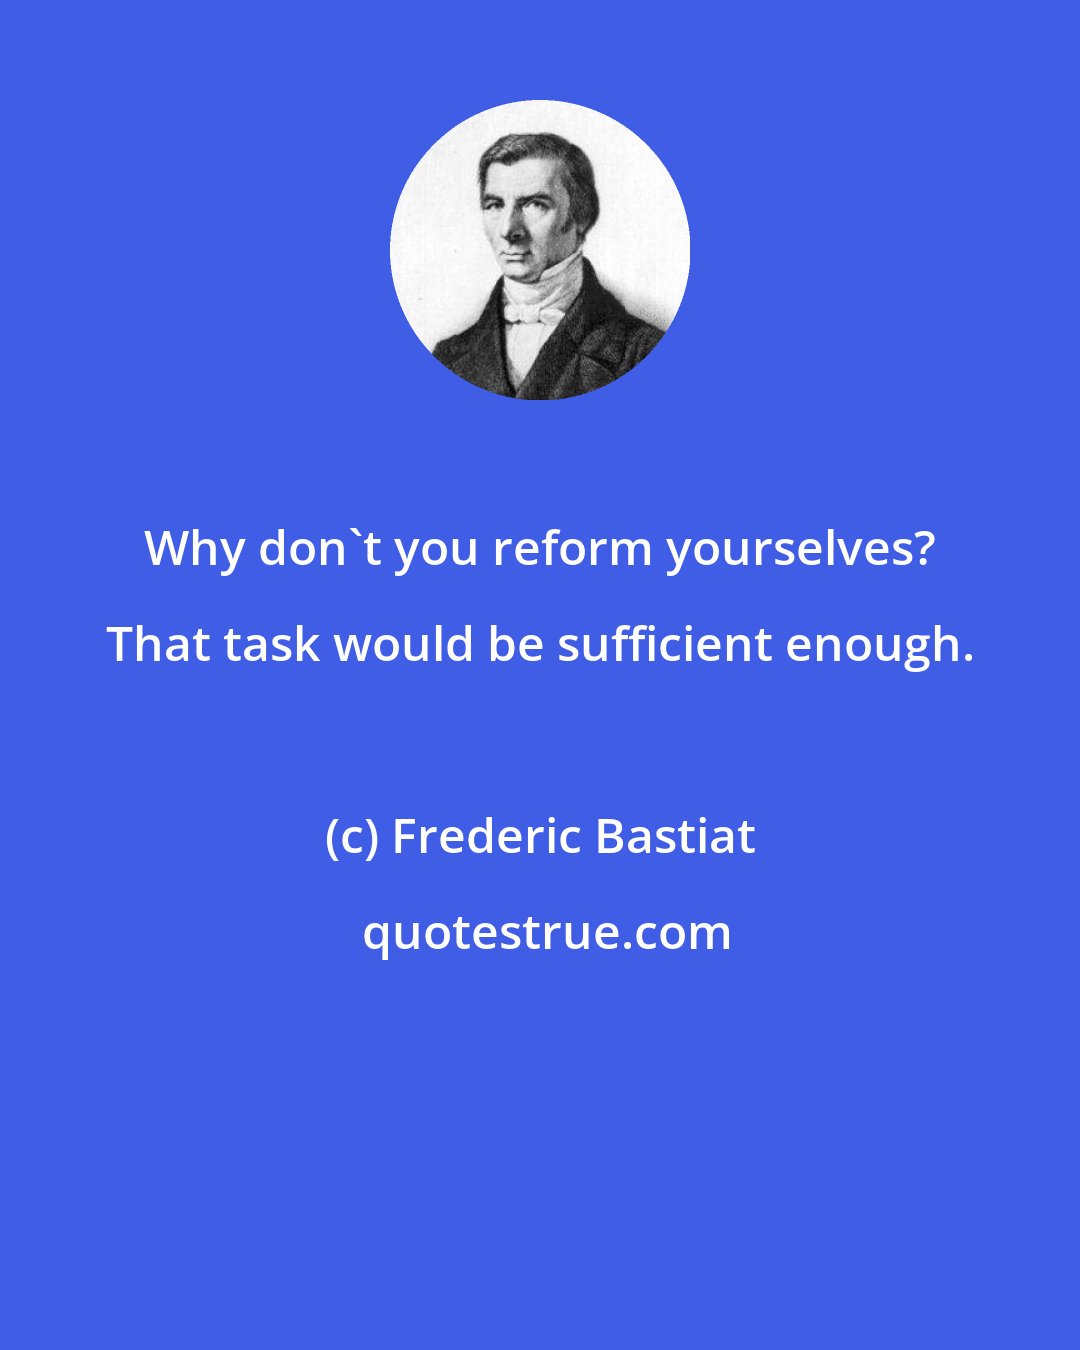 Frederic Bastiat: Why don't you reform yourselves? That task would be sufficient enough.